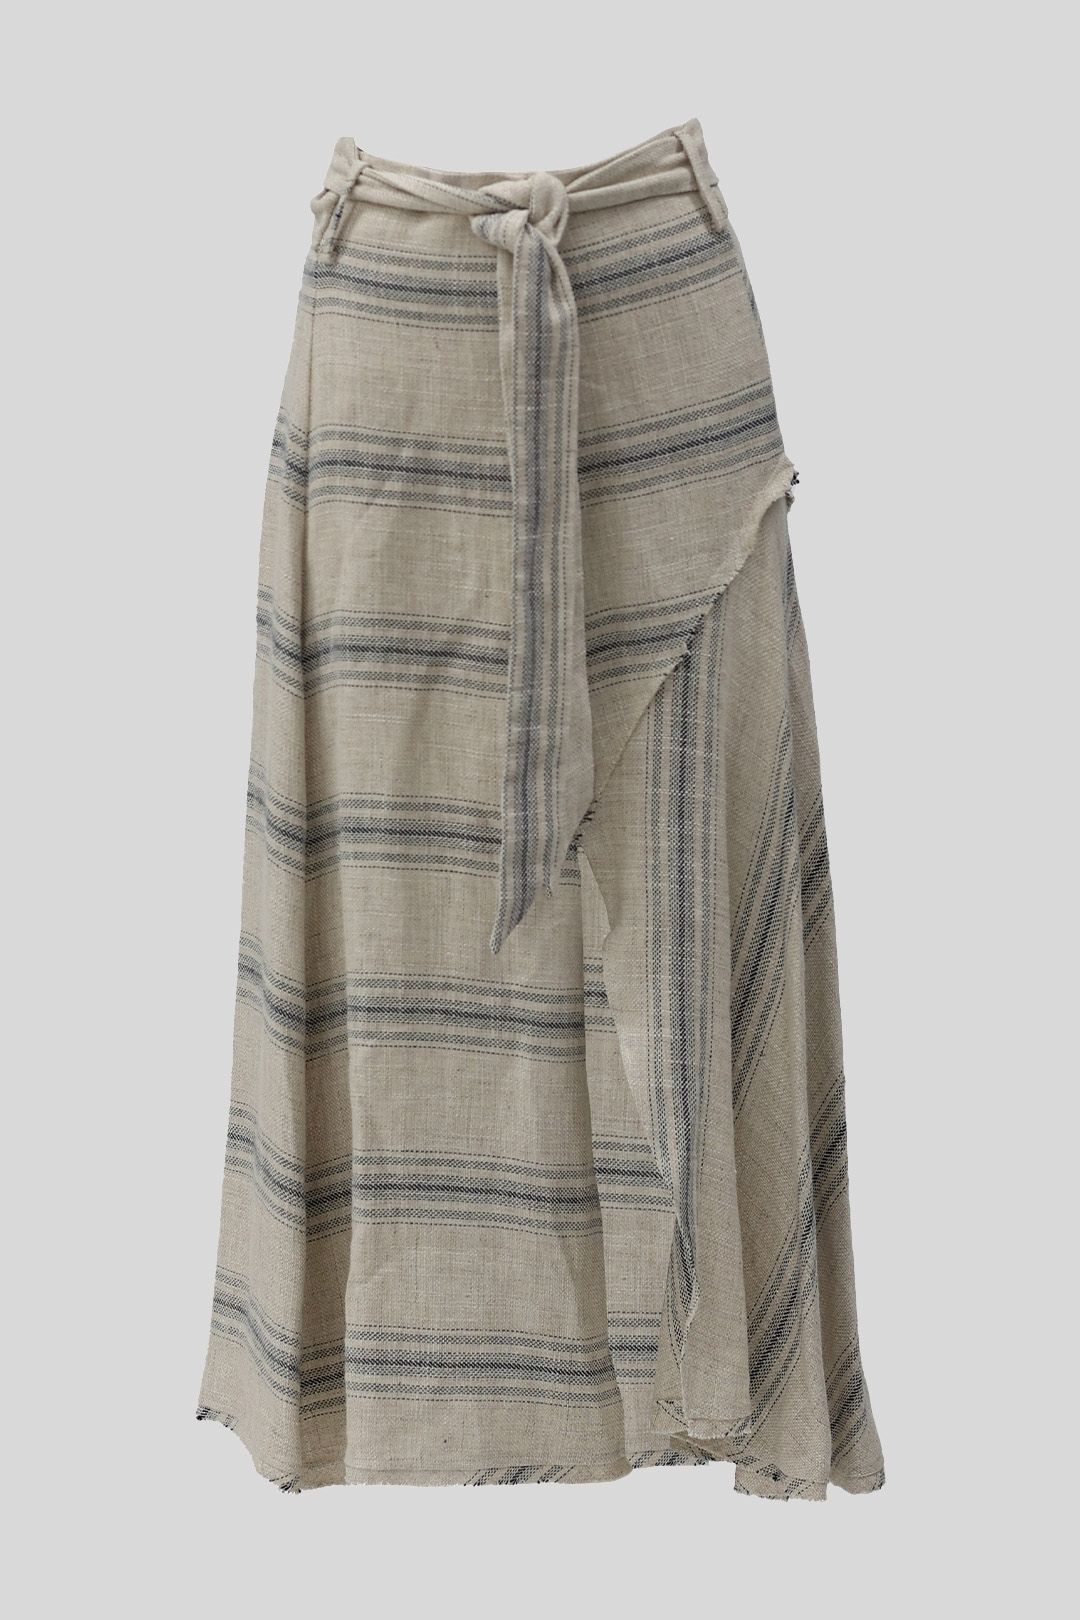 Country Road Flax Frayed Assymetric Midi Skirt